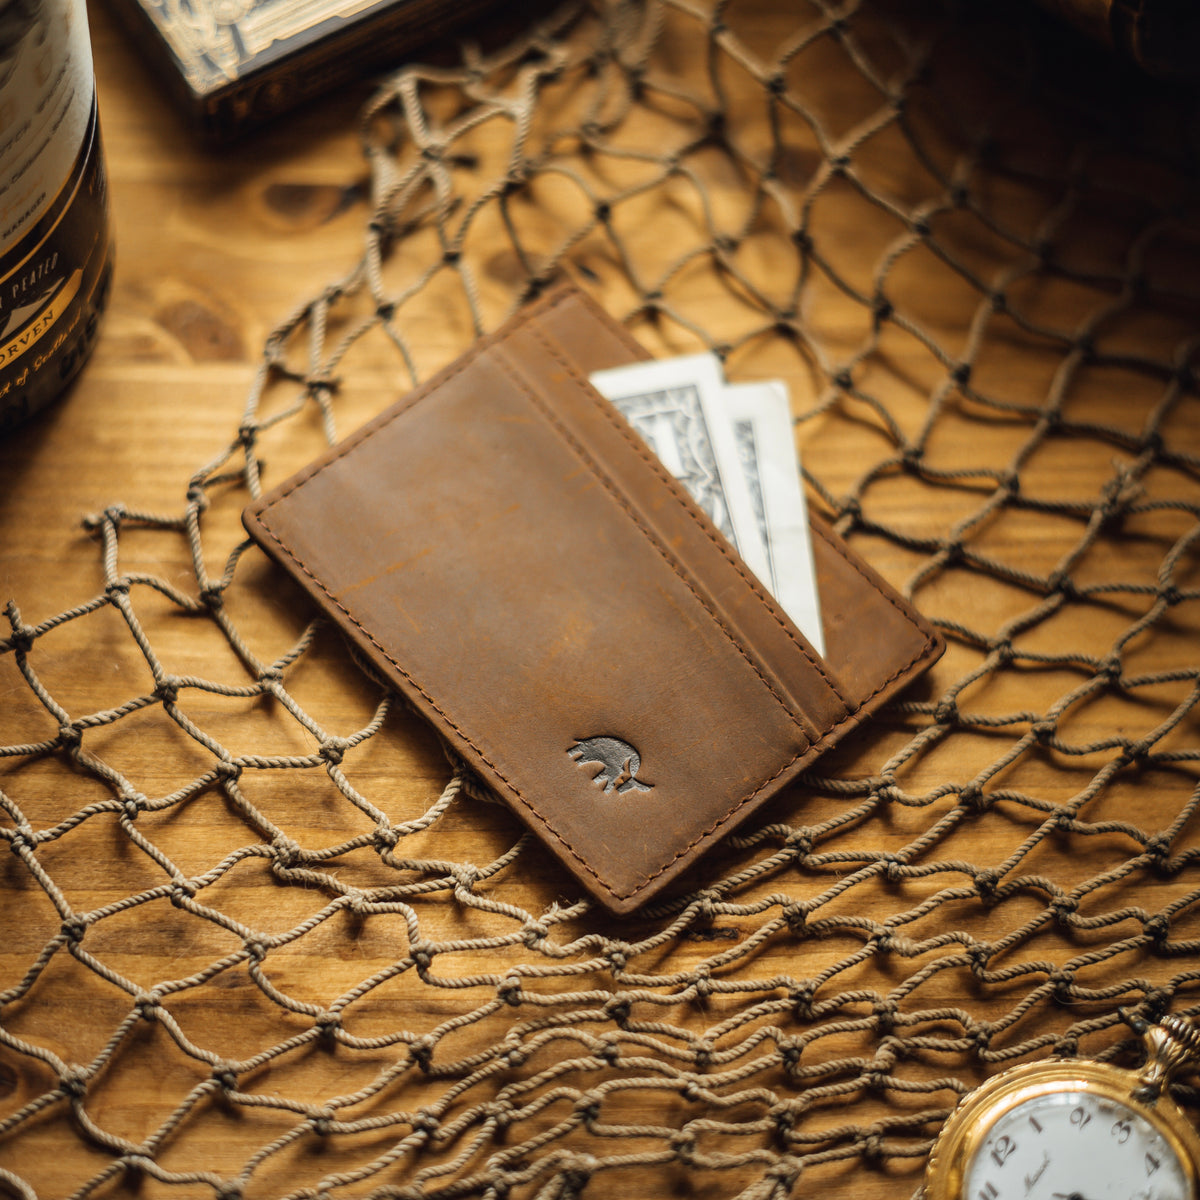 Limited Edition Card Holder Handcrafted From Premium Italian 